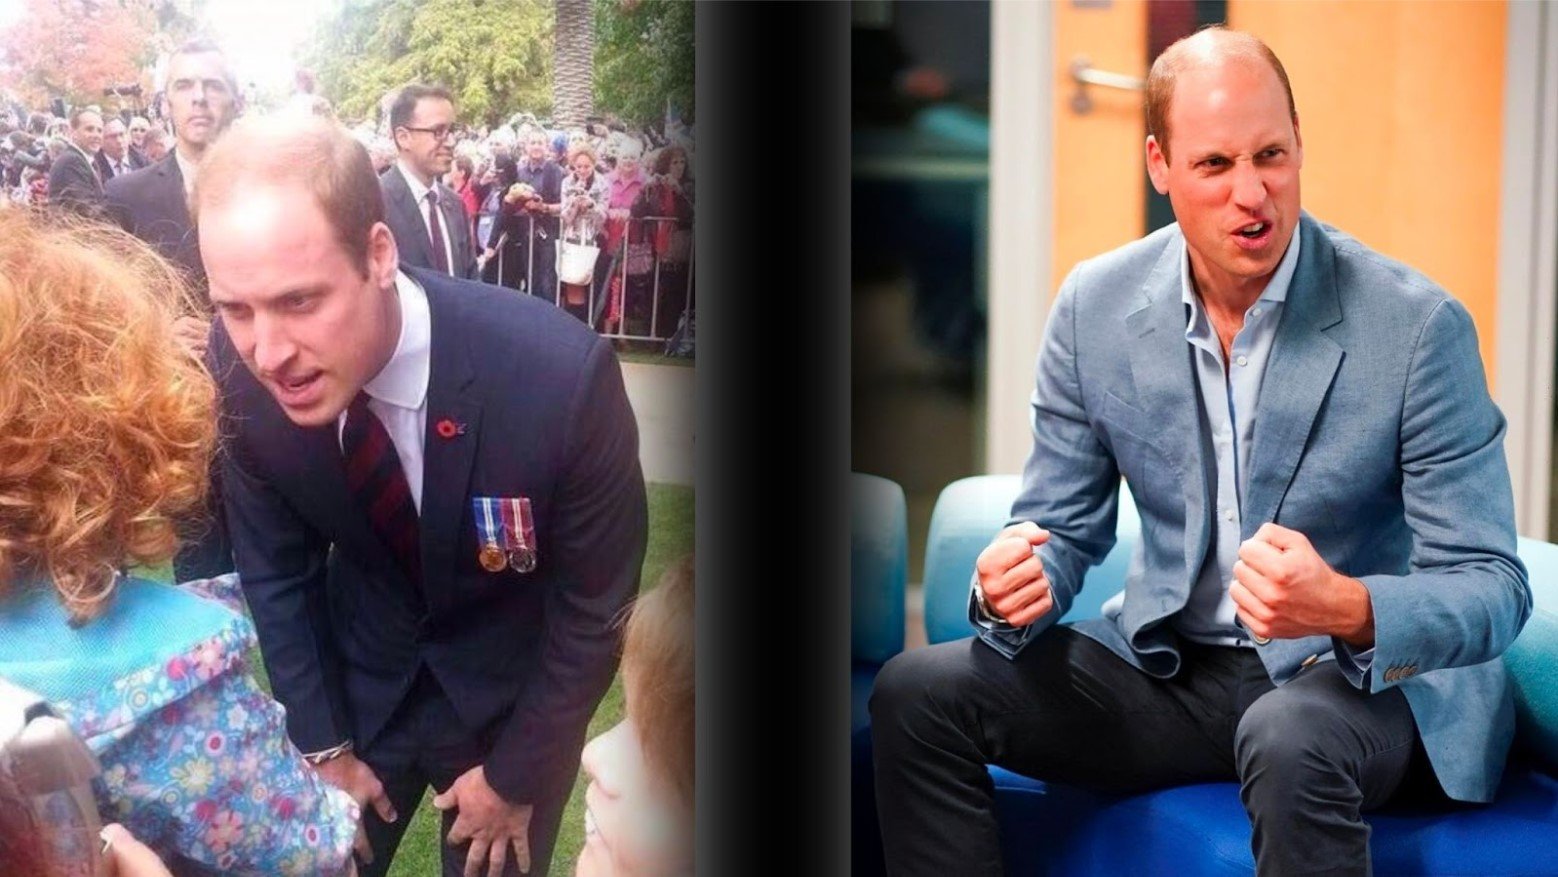 Prince William is shown speaking sternly to a subject (left) and is shown frustrated (right)